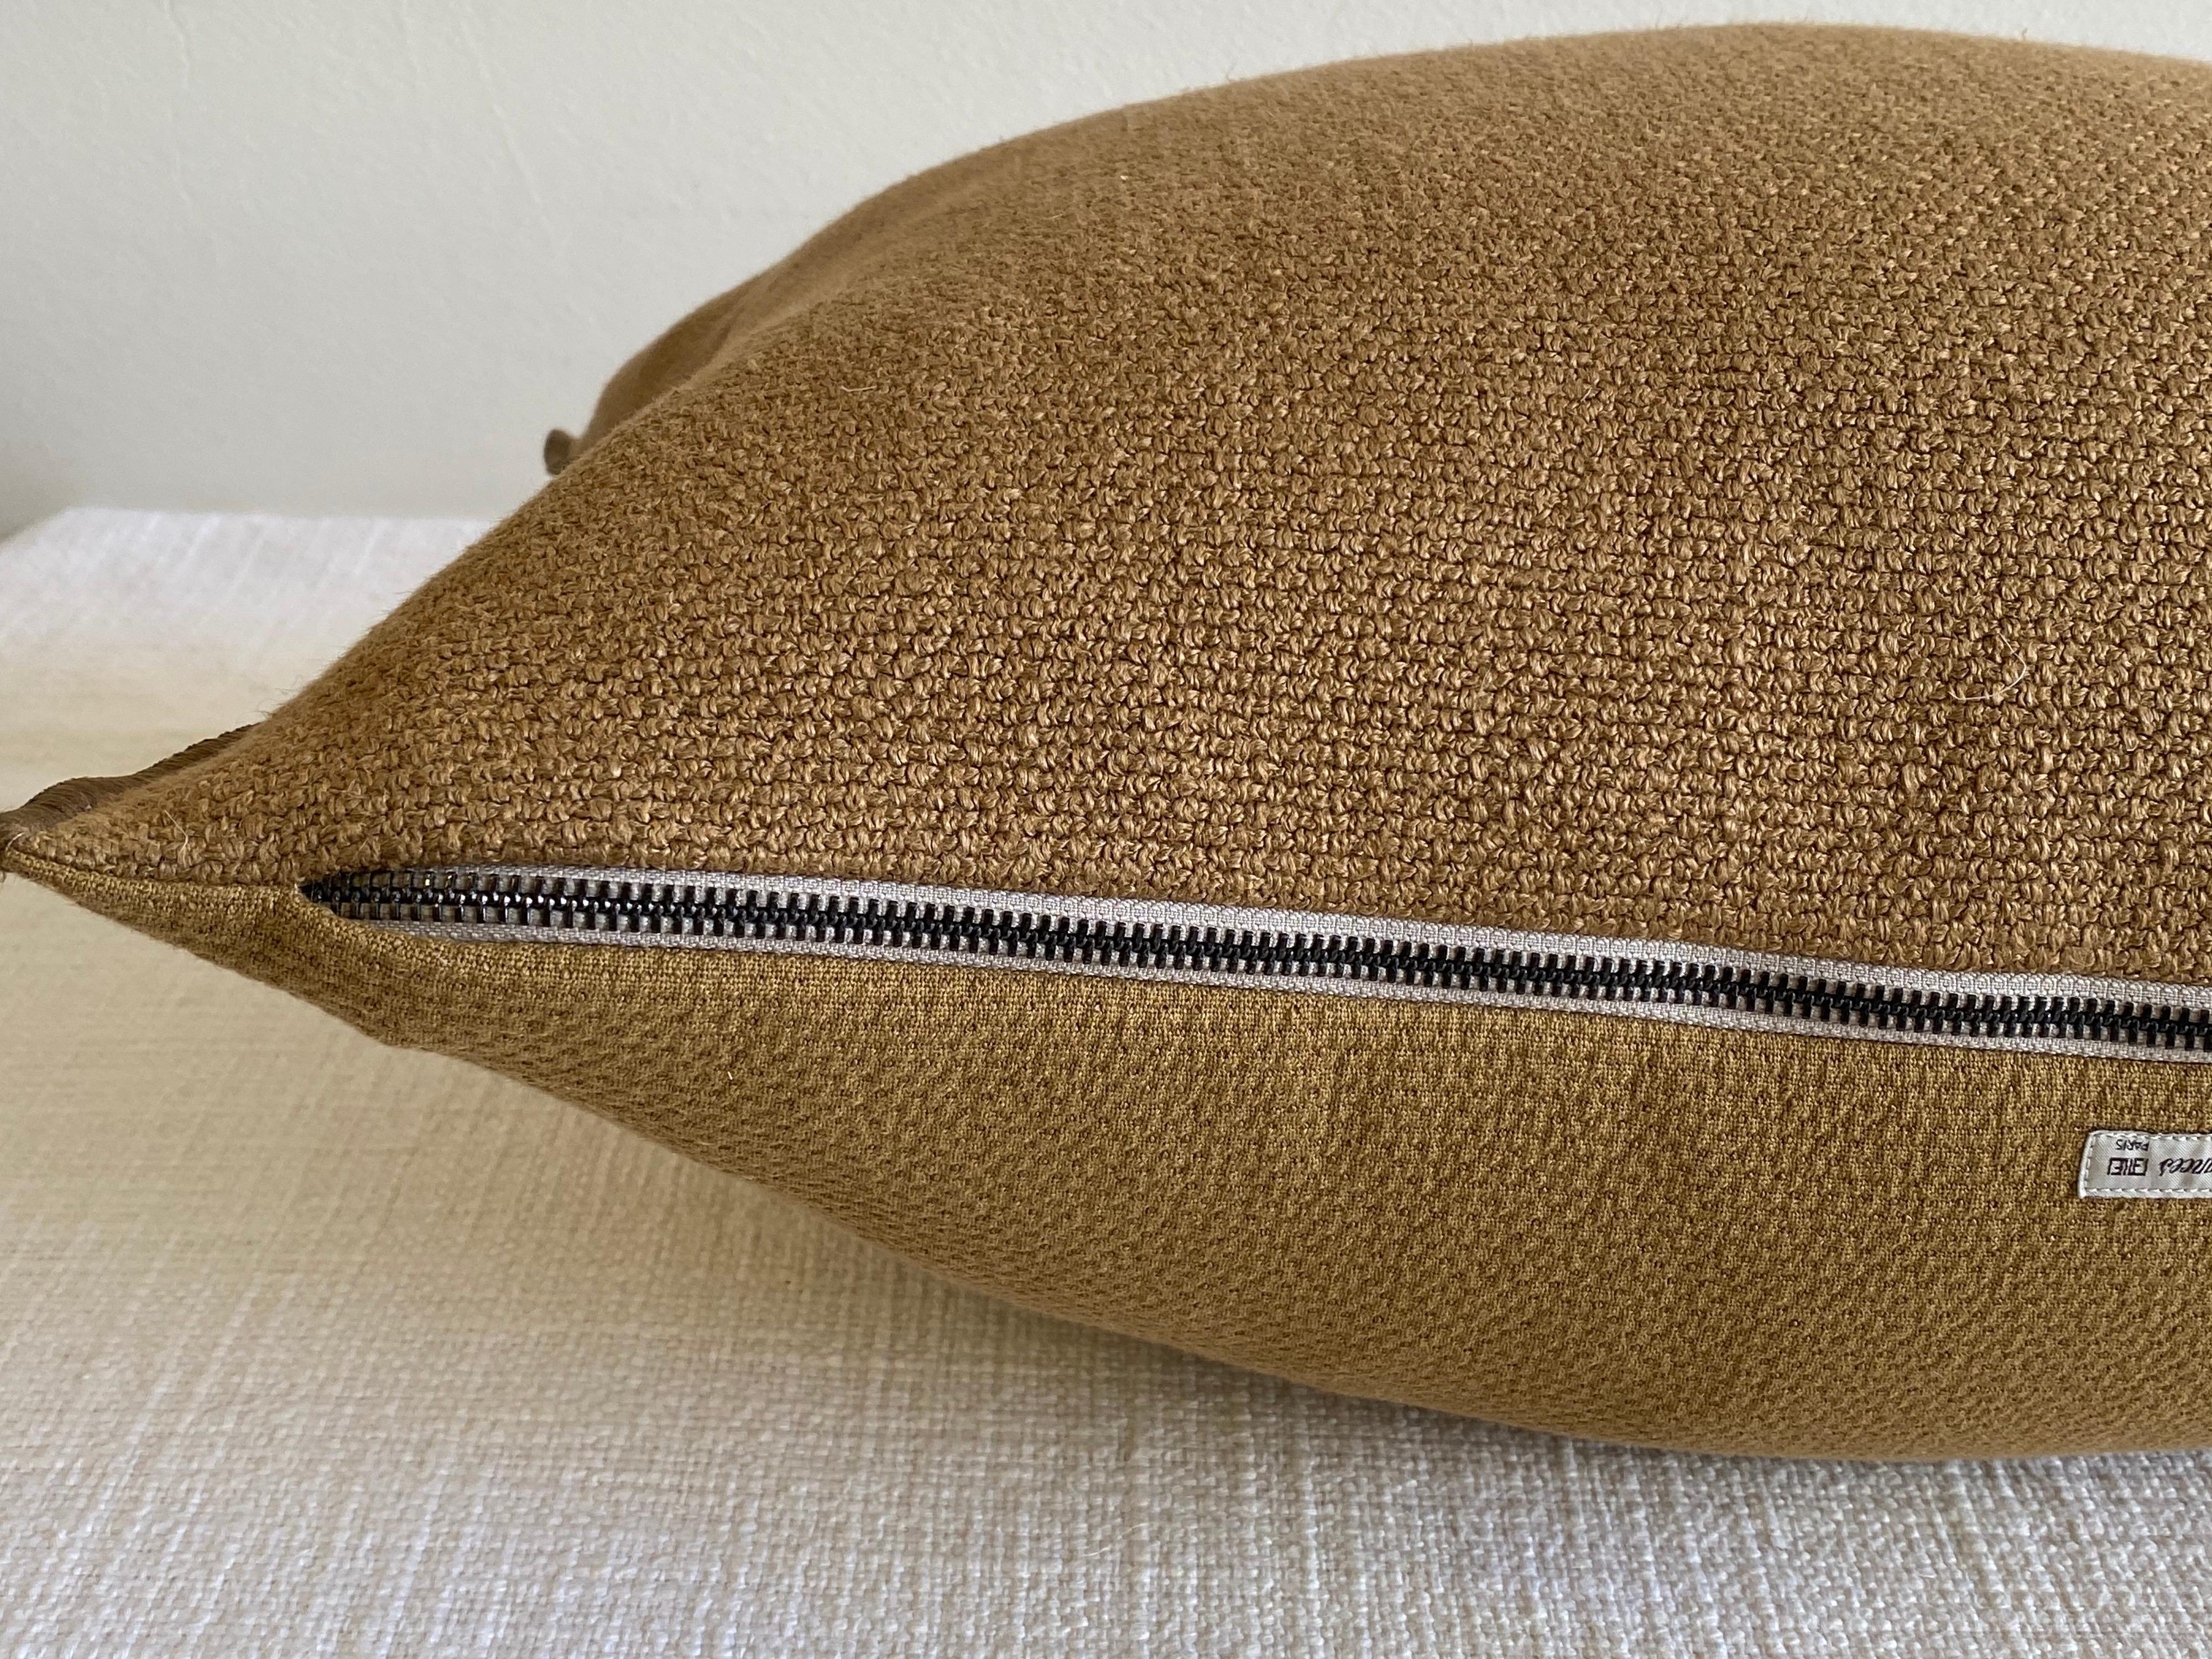 Contemporary Fromentera French Linen Accent Pillow For Sale